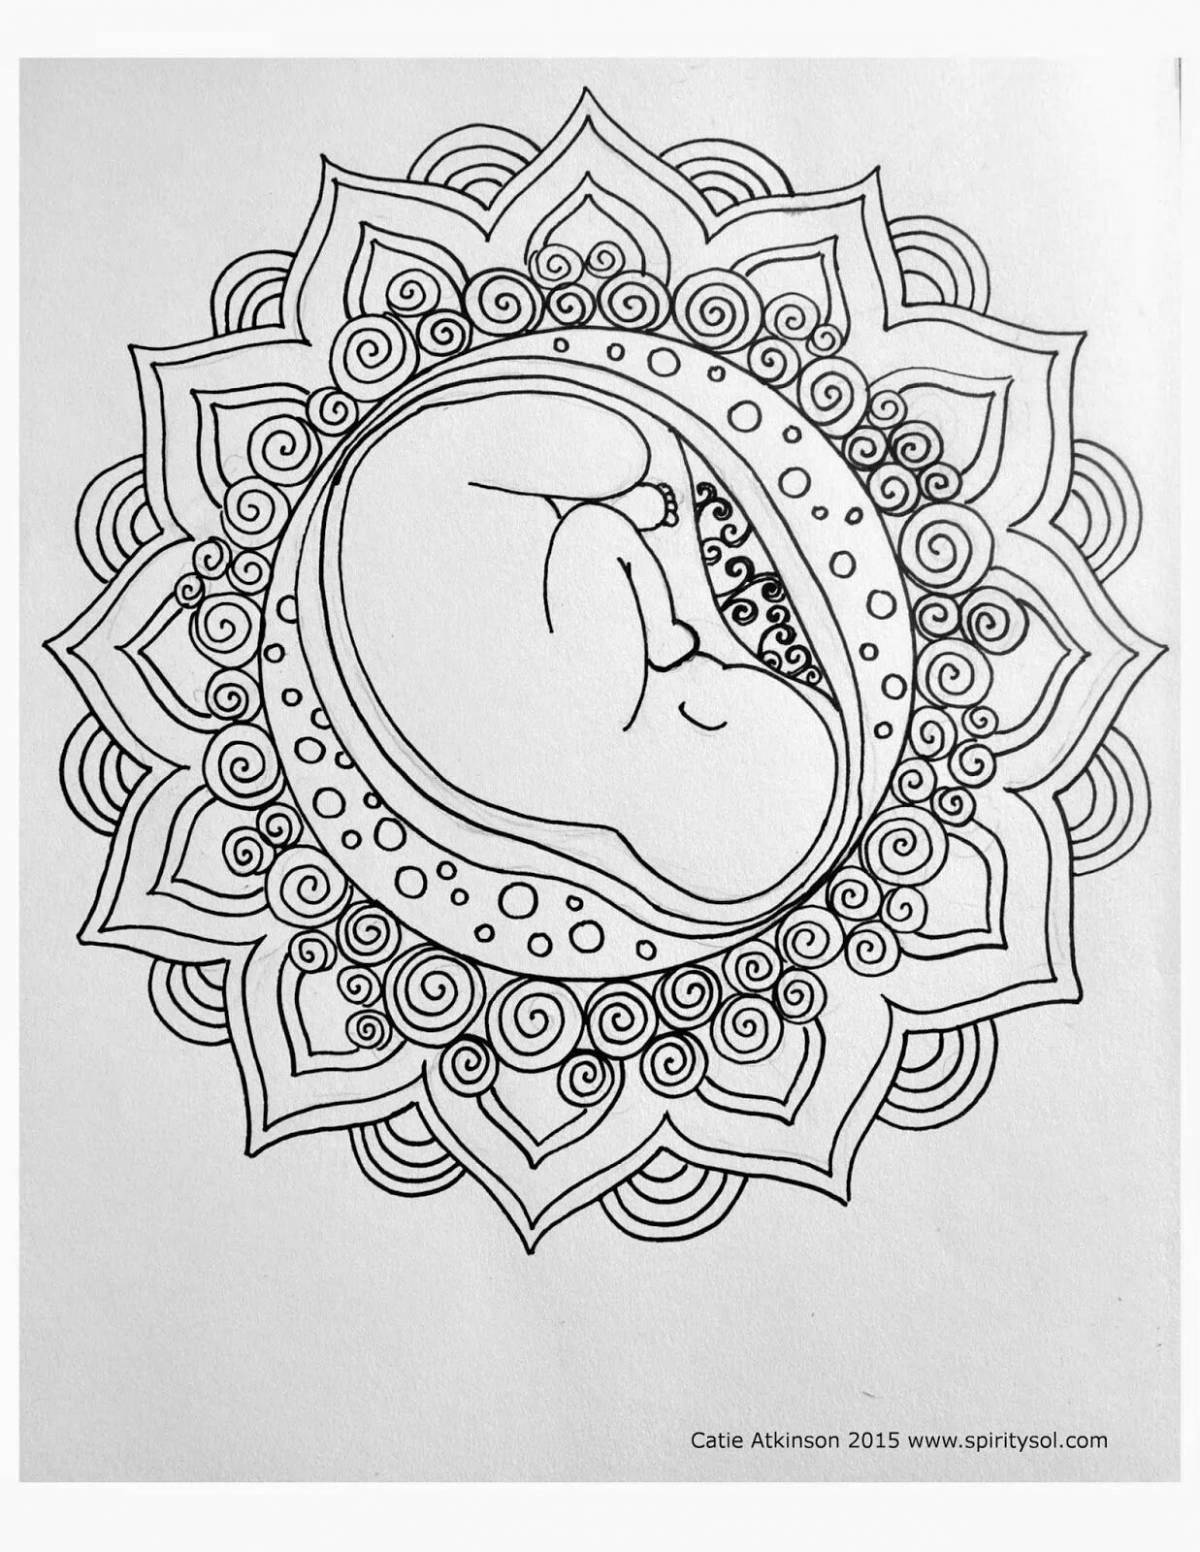 Awesome pregnancy coloring page